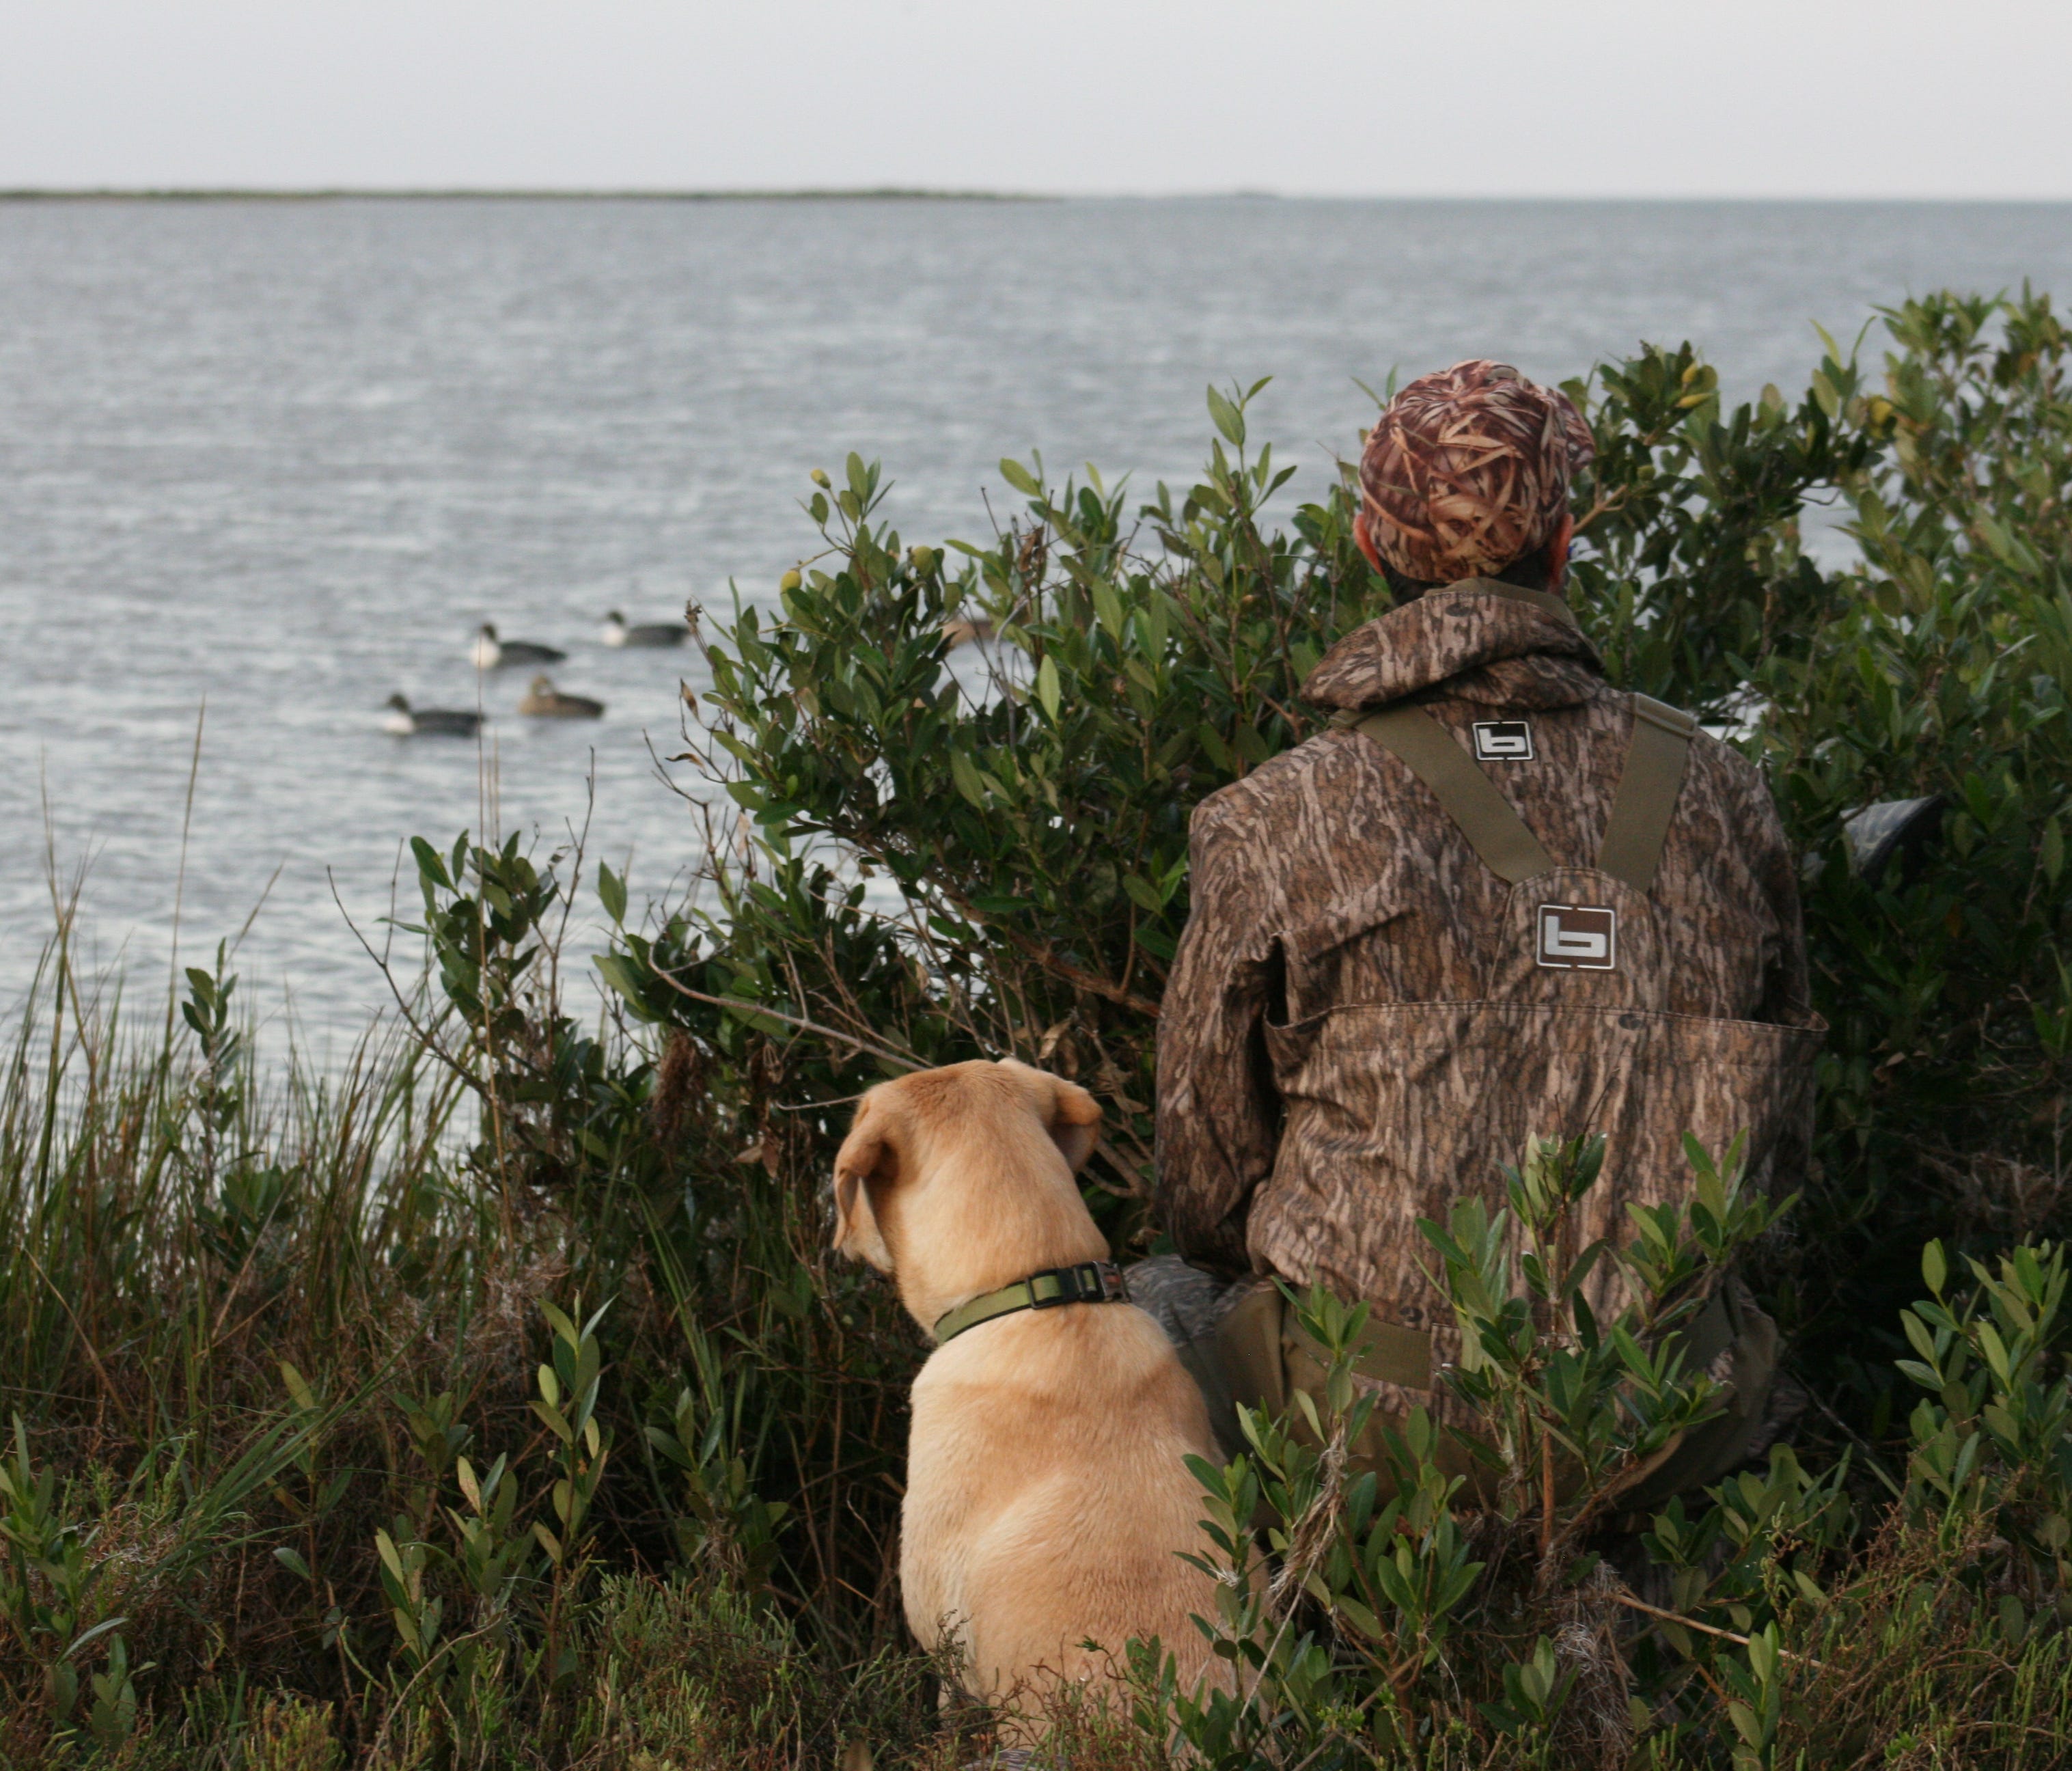 Regardless of the landscape – be it Texas coast, Arkansas rice field or a backwater slough off upper Mississippi River – much of any successful waterfowl hunt is spent scanning the sky.